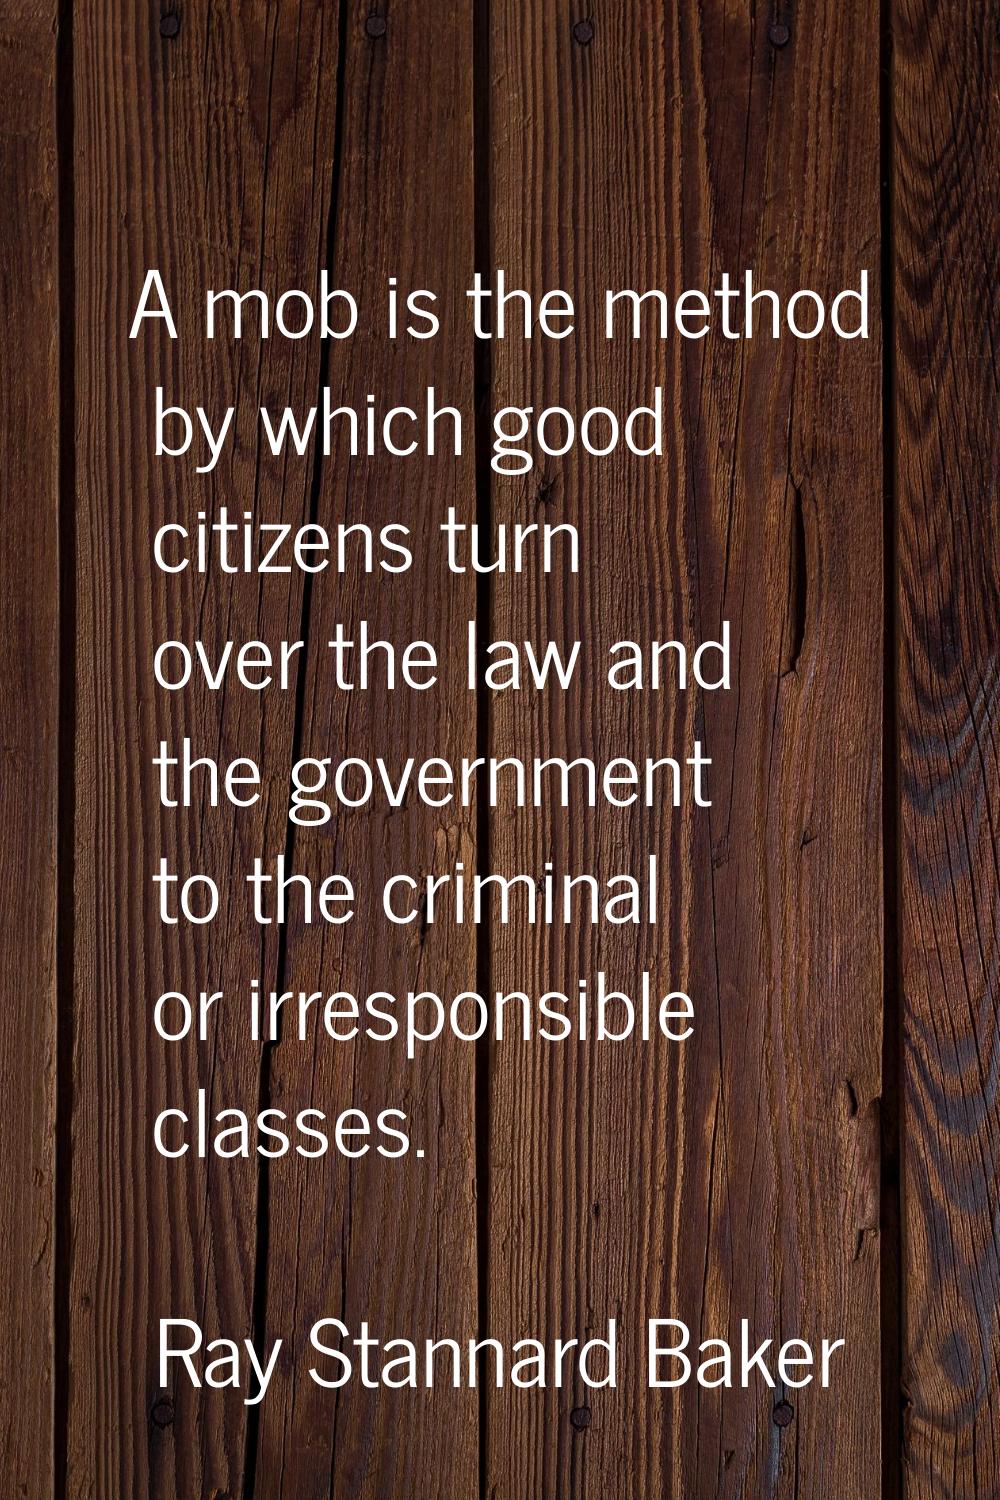 A mob is the method by which good citizens turn over the law and the government to the criminal or 